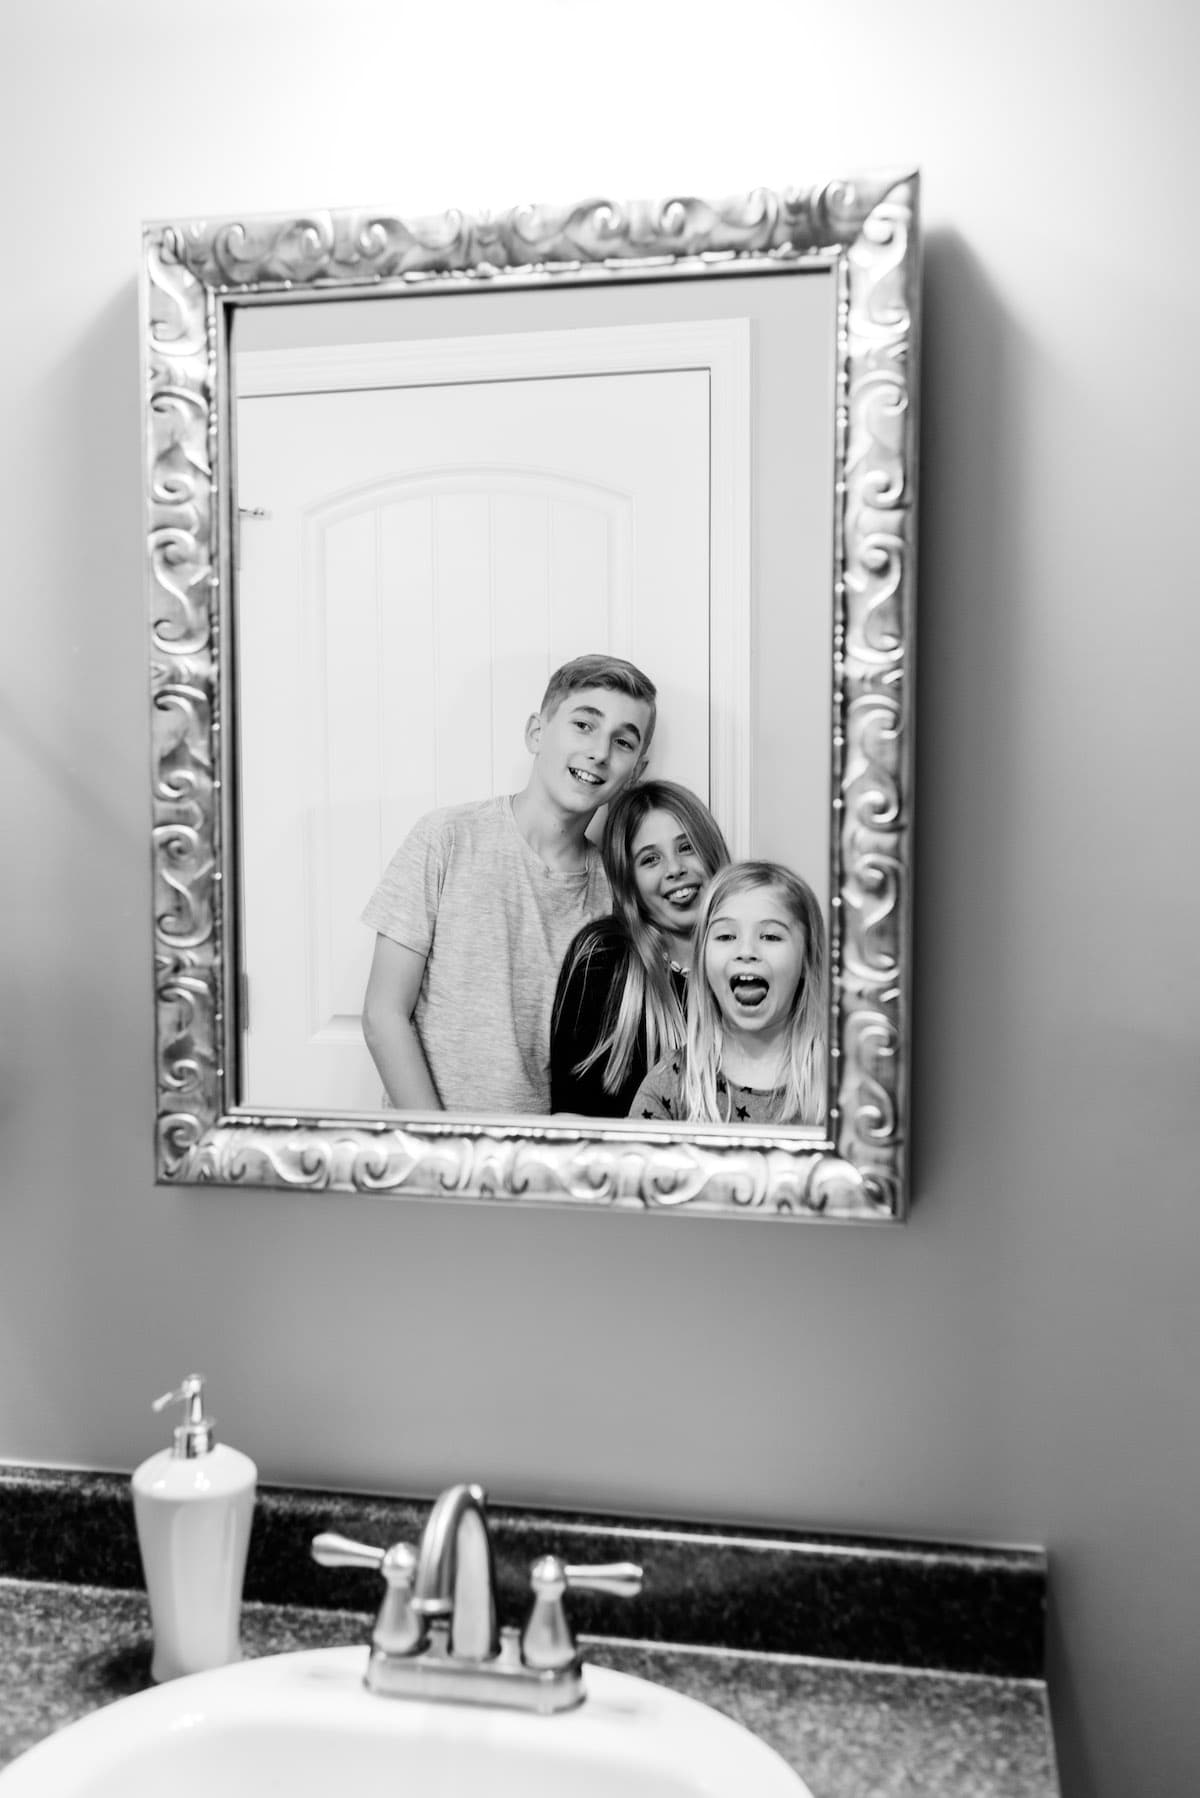 Family Photos at Home Before Moving: Family Lifestyle Photography at Home. Tips for Capturing Meaningful Family Lifestyle Photos at Home